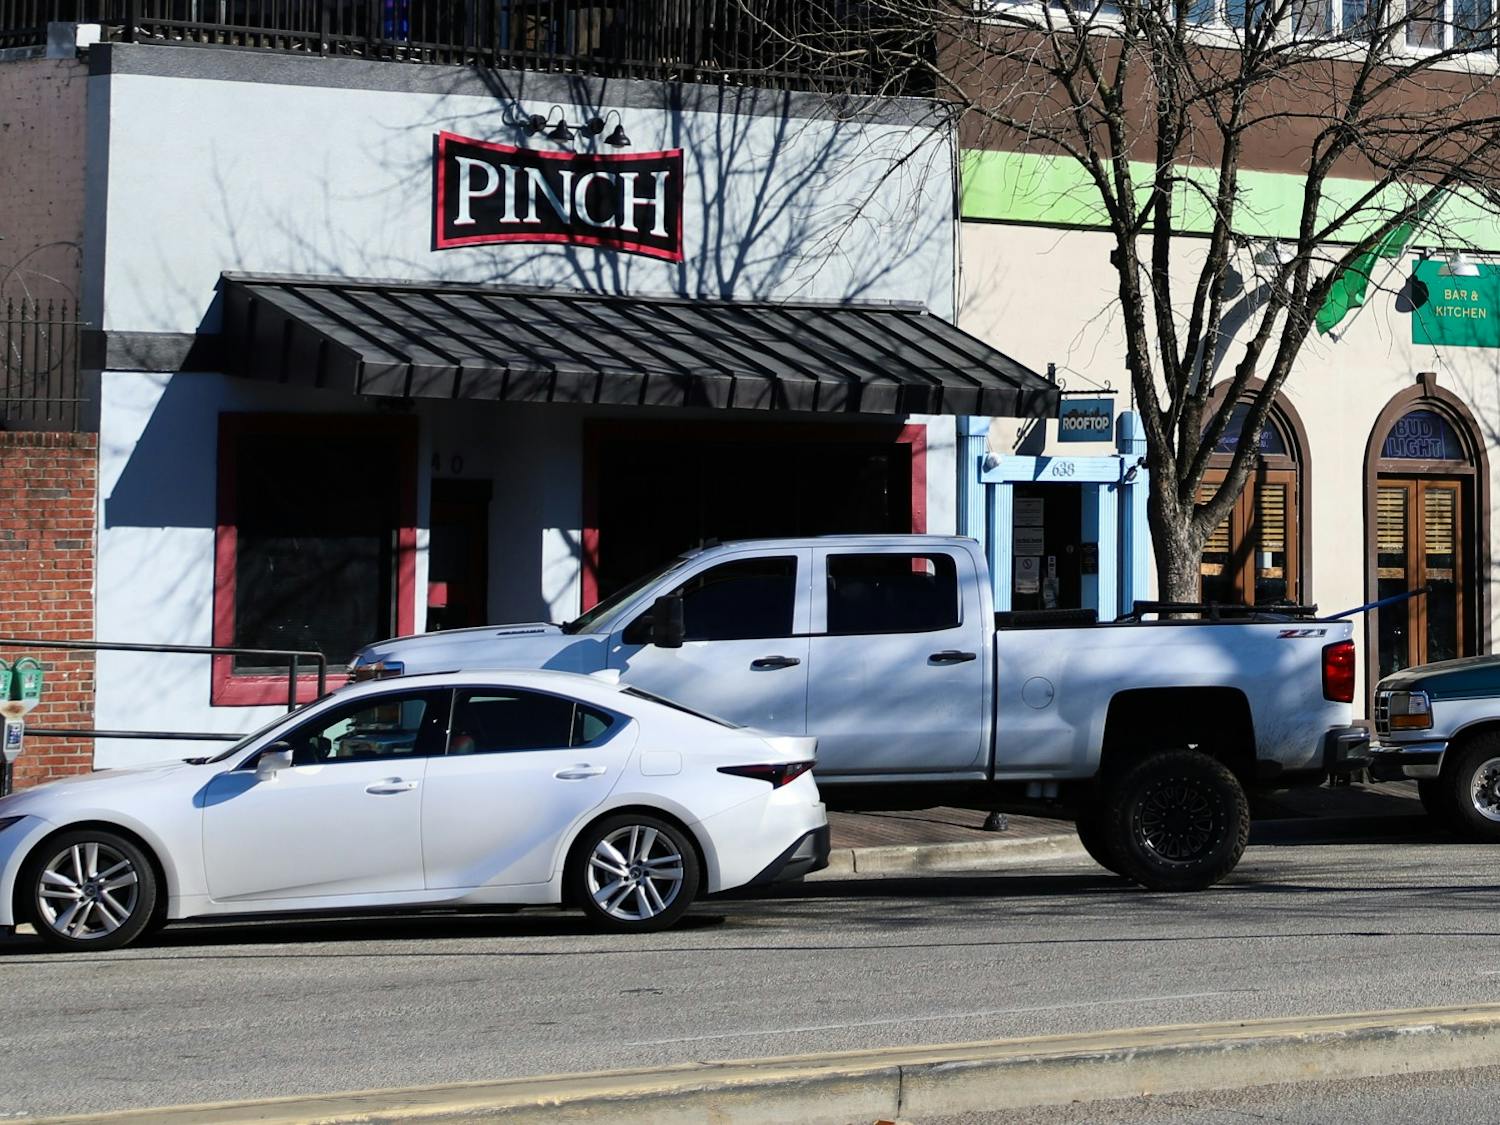 &nbsp;The popular bars Pinch, Rooftop and Murphey’s Law from the corner of Harden Street and Santee Avenue at 4:13 p.m. on Jan. 29, 2021.&nbsp;